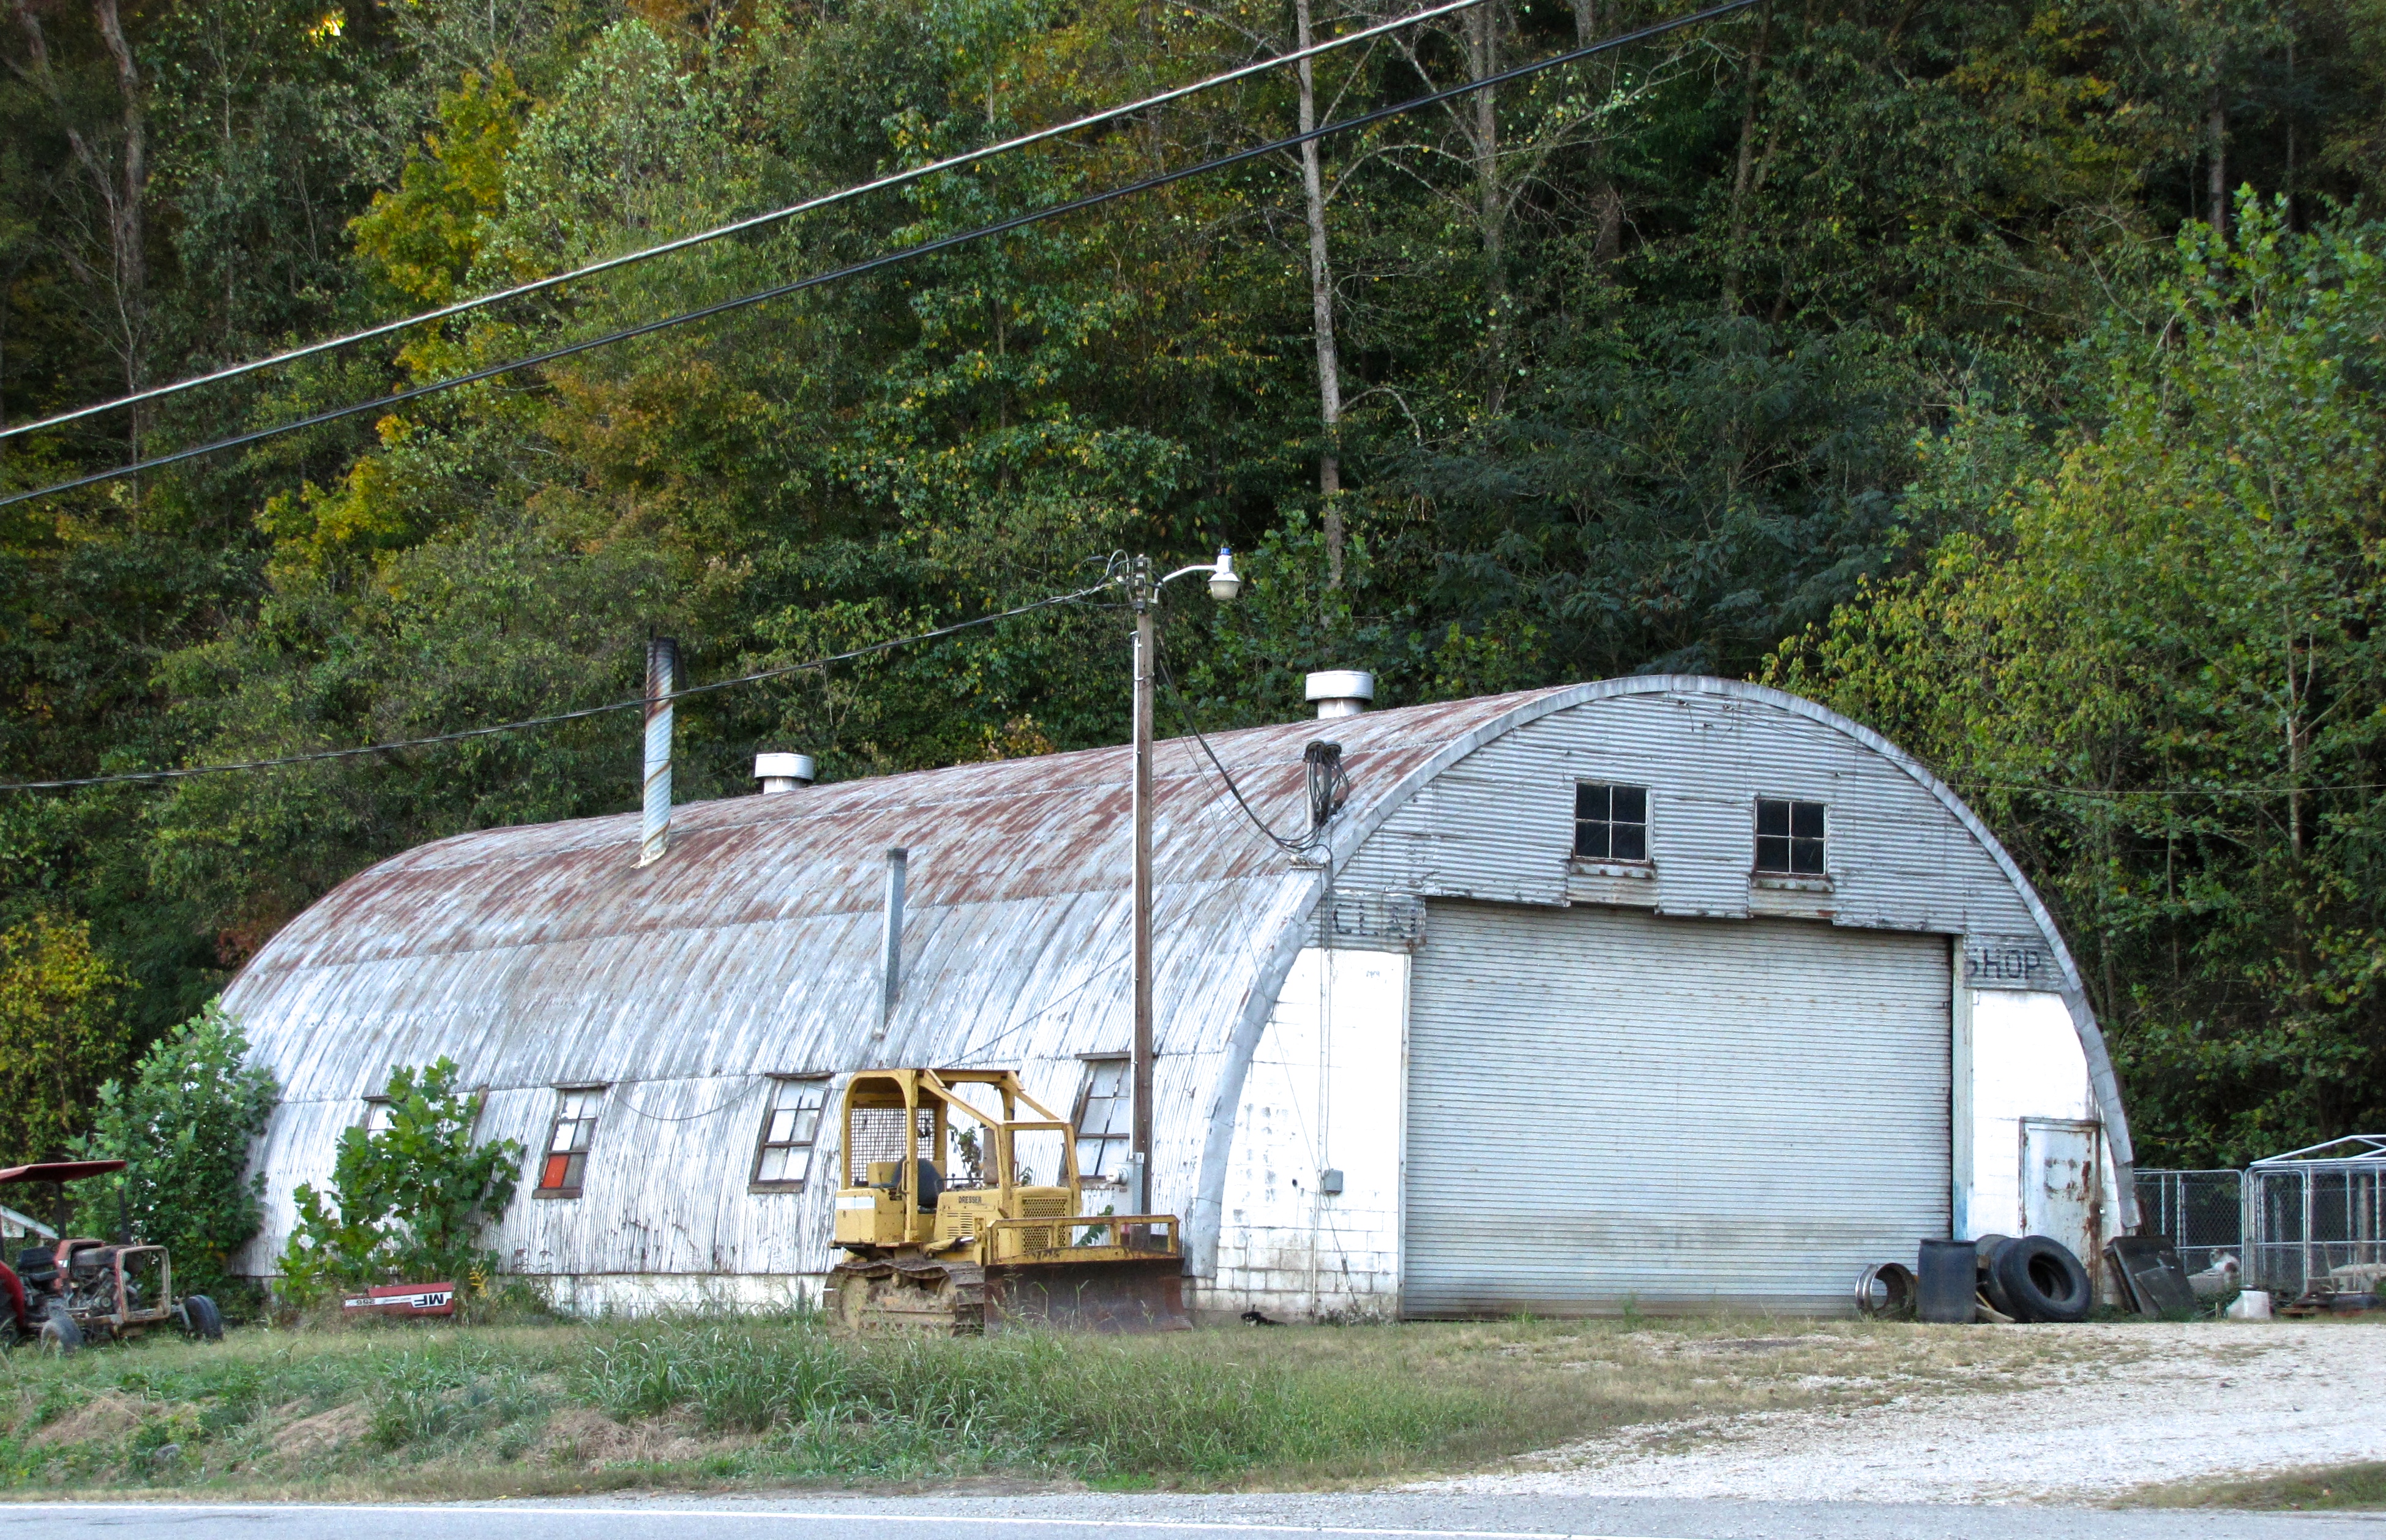 quonset hut in Berea, KY